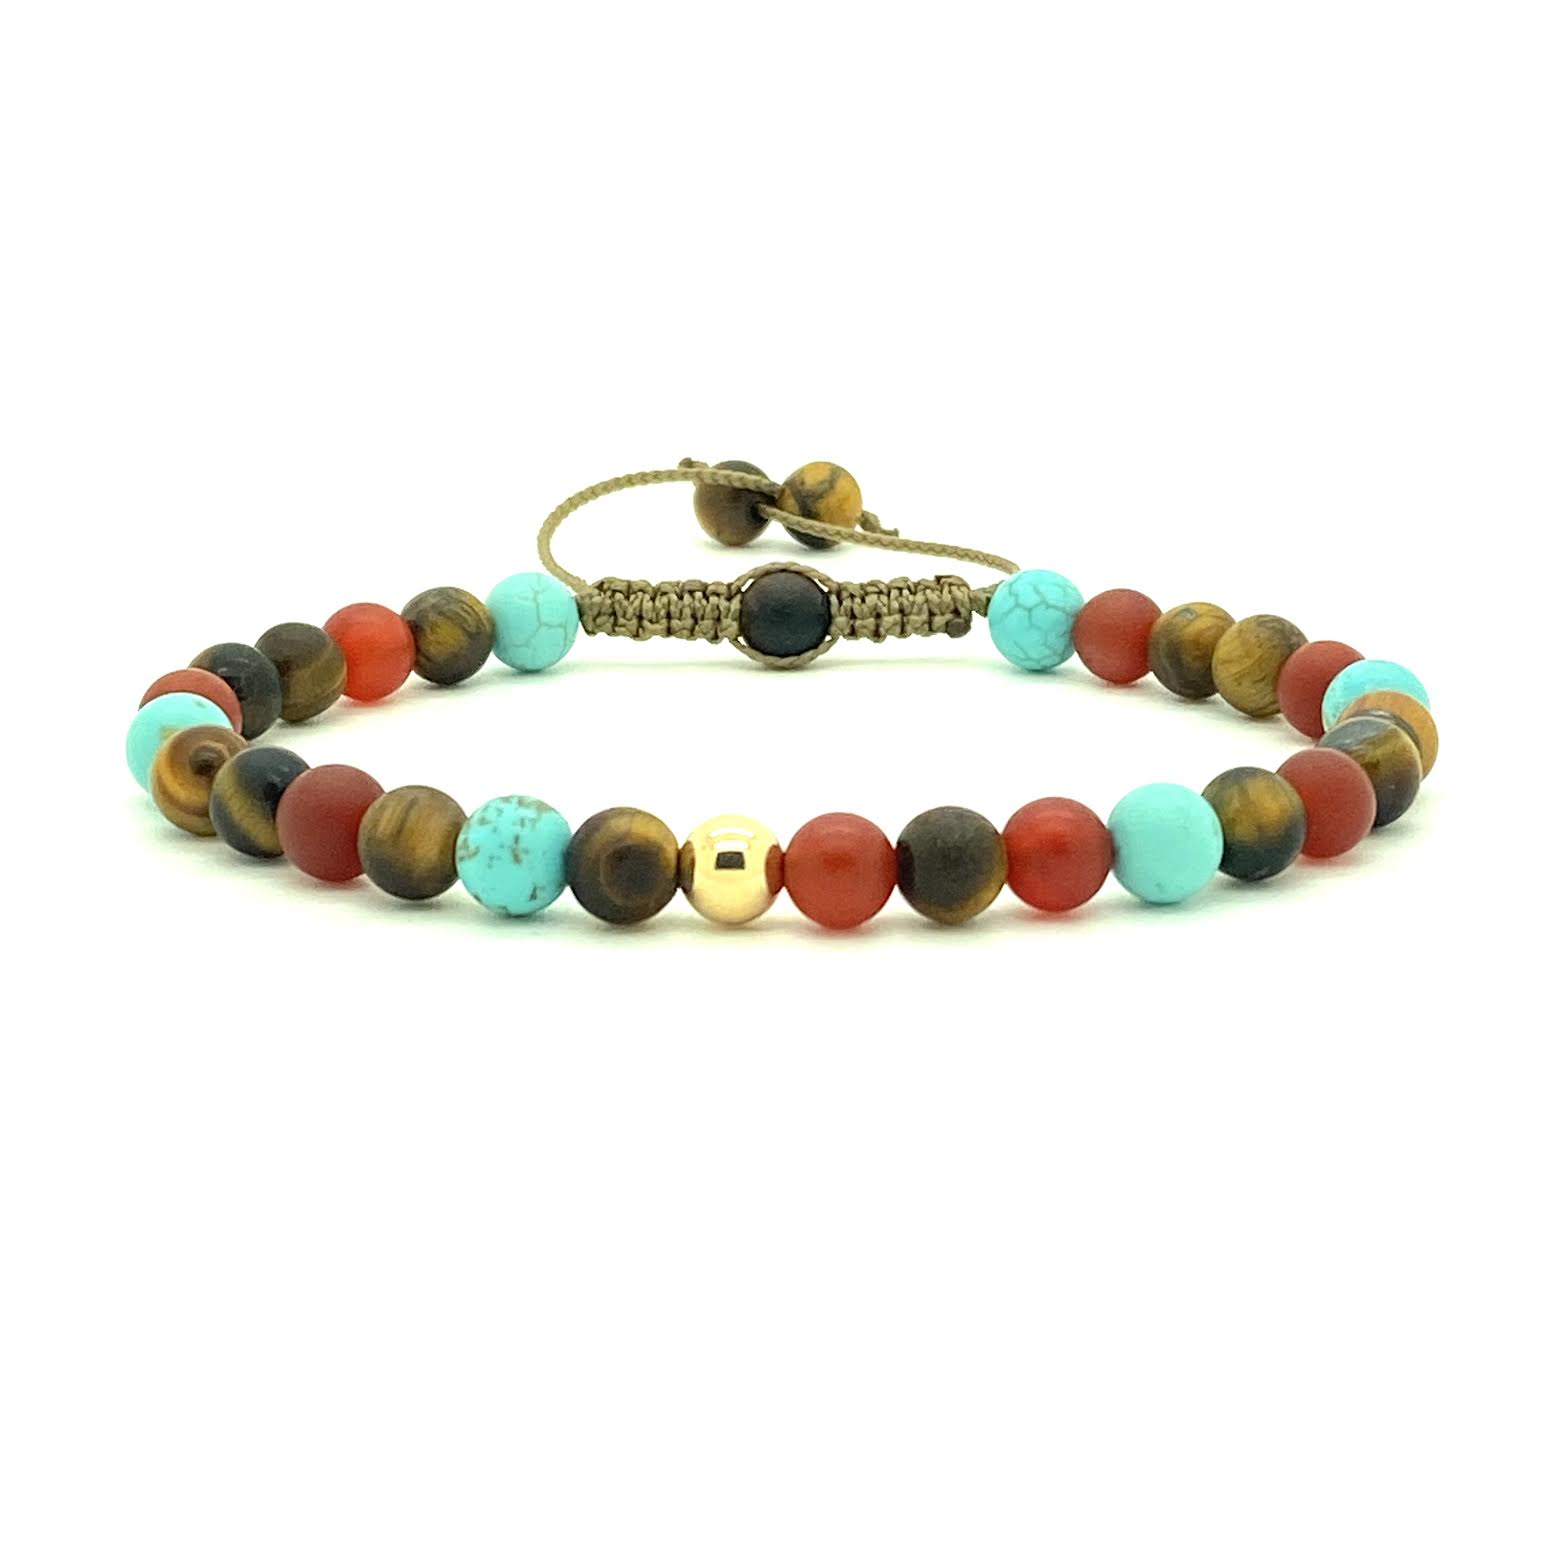 Tiger's Eye is a powerful stone that helps to release fear and anxiety and aids harmony and balance. Paired with Turquoise and Carnelian gemstones, with your choice of 14K white, yellow or rose gold bead. Hand knotted adjustable cord for a perfect fit.  Made by WristBend